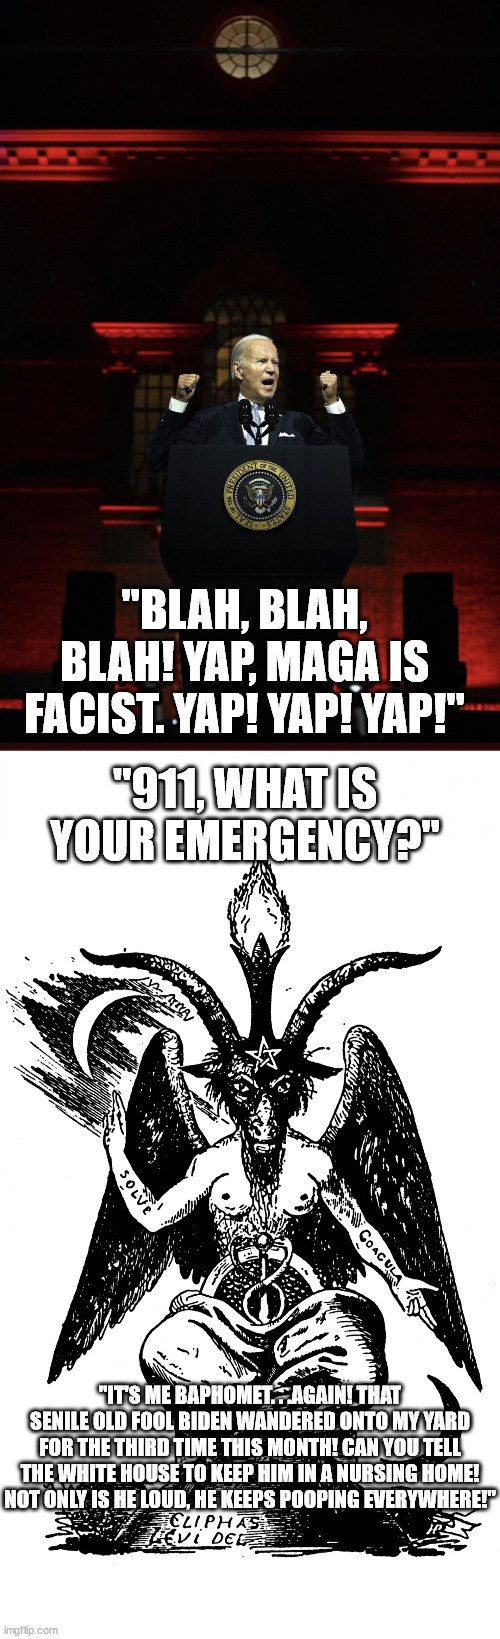 "BLAH, BLAH, BLAH! YAP, MAGA IS FACIST. YAP! YAP! YAP!"; "911, WHAT IS YOUR EMERGENCY?"; "IT'S ME BAPHOMET. . .AGAIN! THAT SENILE OLD FOOL BIDEN WANDERED ONTO MY YARD FOR THE THIRD TIME THIS MONTH! CAN YOU TELL THE WHITE HOUSE TO KEEP HIM IN A NURSING HOME! NOT ONLY IS HE LOUD, HE KEEPS POOPING EVERYWHERE!" | image tagged in best hitler impression,baphomet,creepy joe biden,political humor,memes | made w/ Imgflip meme maker